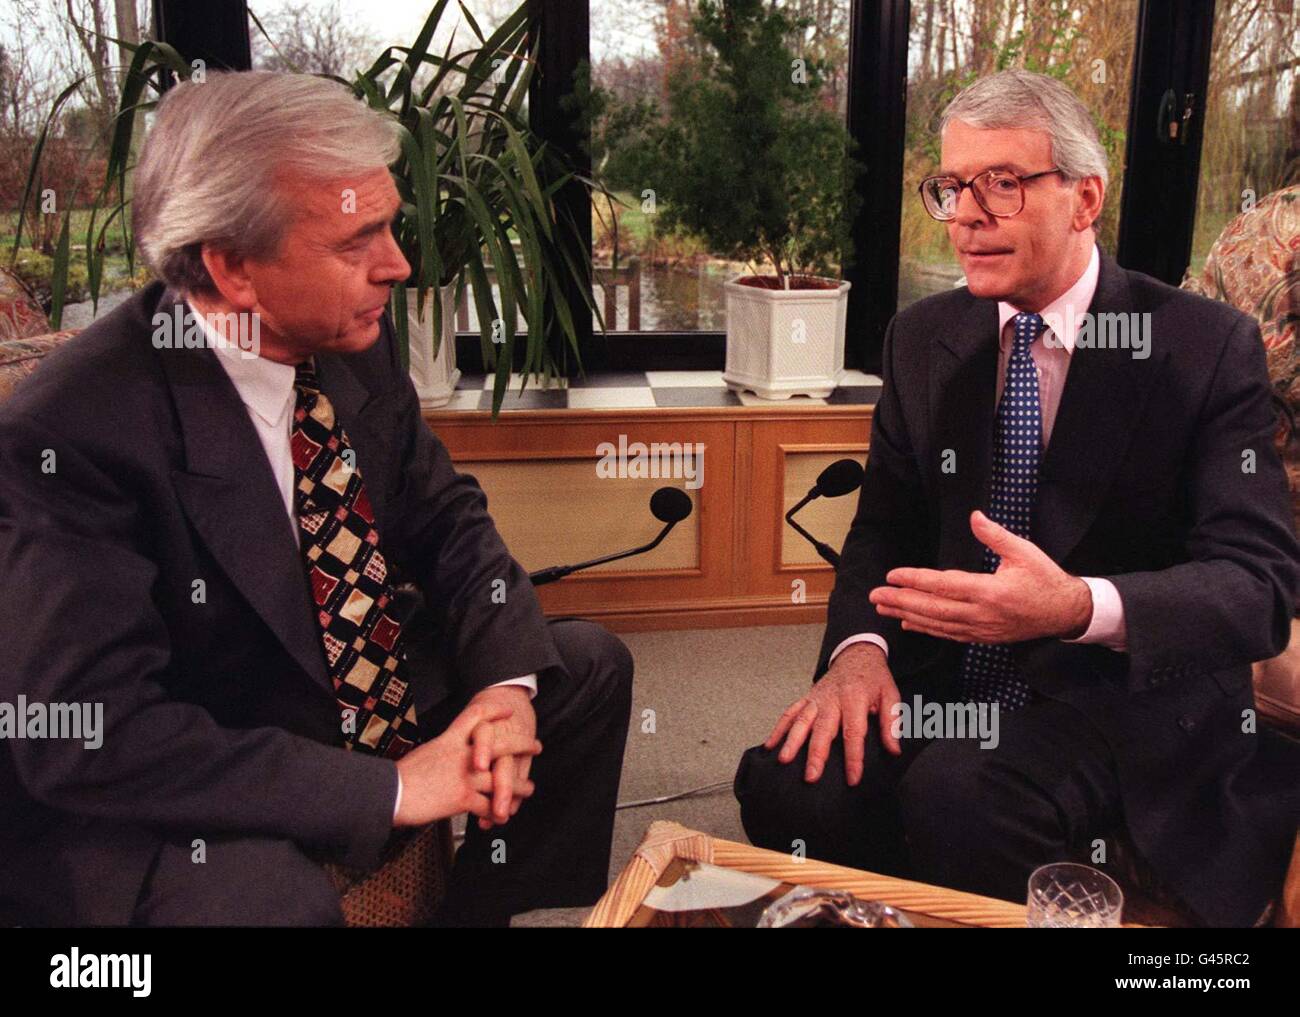 Prime Minister John Major (right) prior to his interview with John Humphrys (left), on the BBC On The Record programme, at his home near Huntingdon today (Sunday). Photo by Tony Harris. See PA Story POLITICS Major. Stock Photo